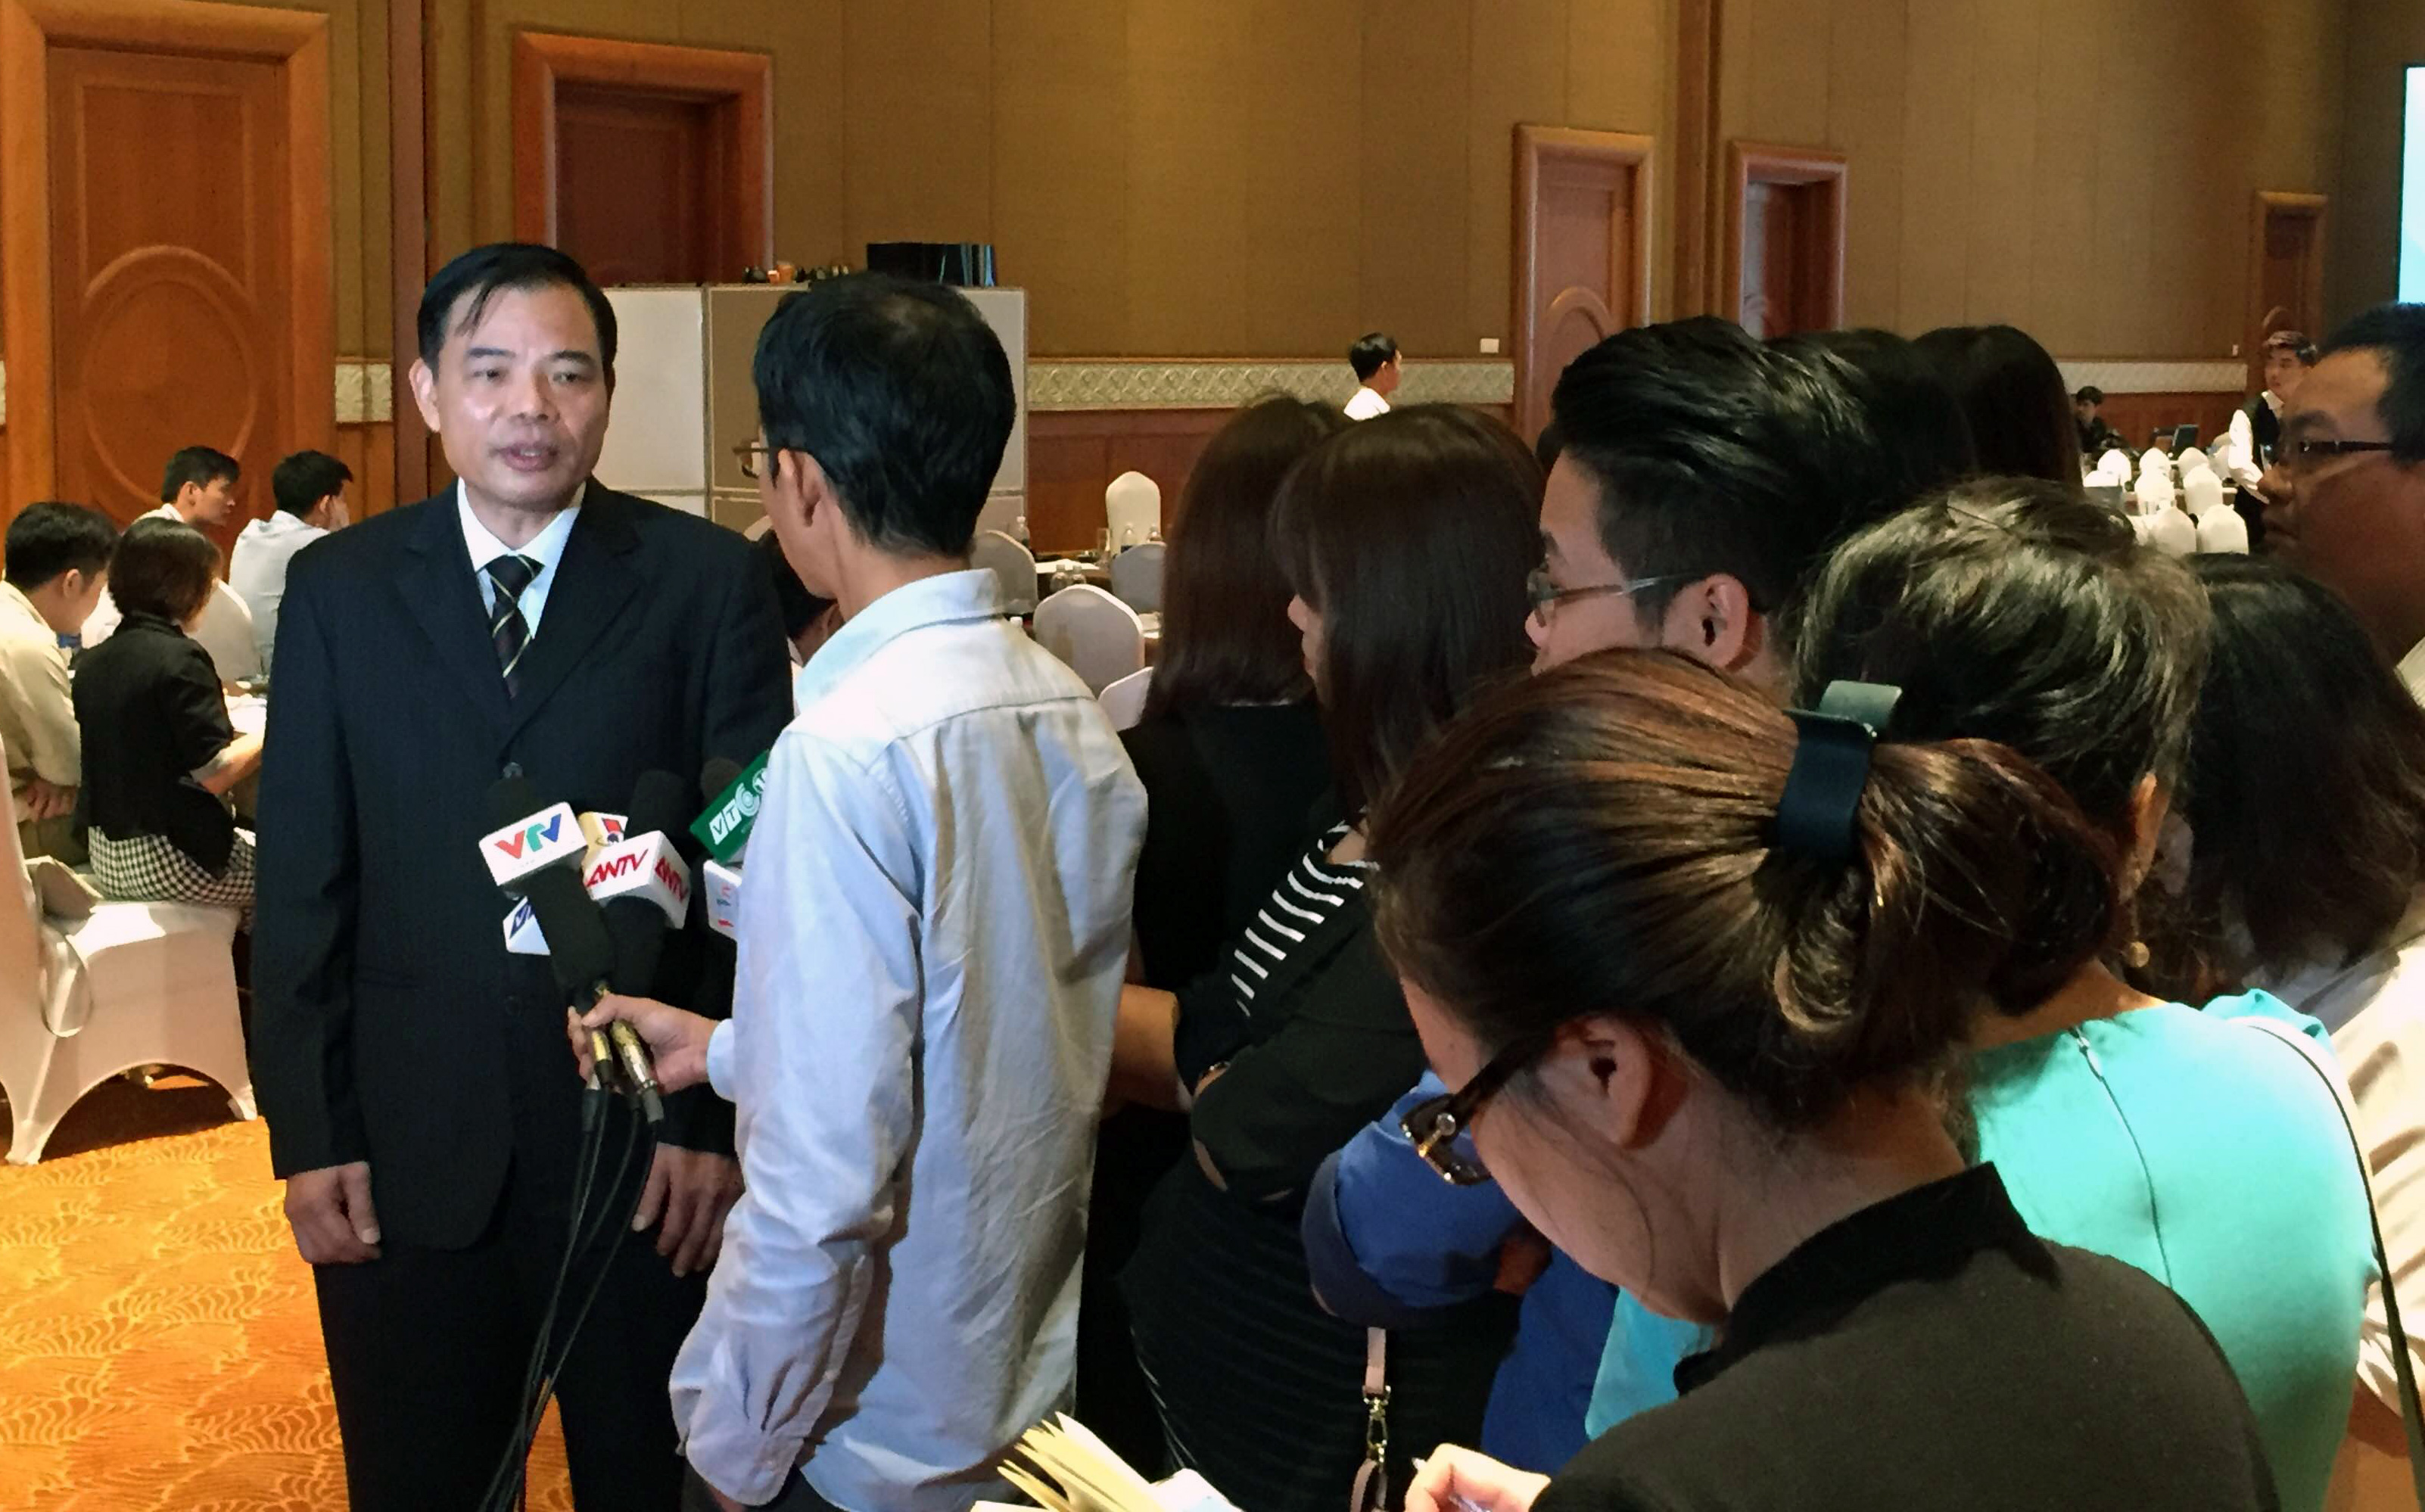 Nguyen Xuan Cuong, Minister of Agriculture and Rural Development and Chairman of the Central Committee for Natural Disaster Prevention, takes questions from the press at the conference. Photo: Tuoi Tre